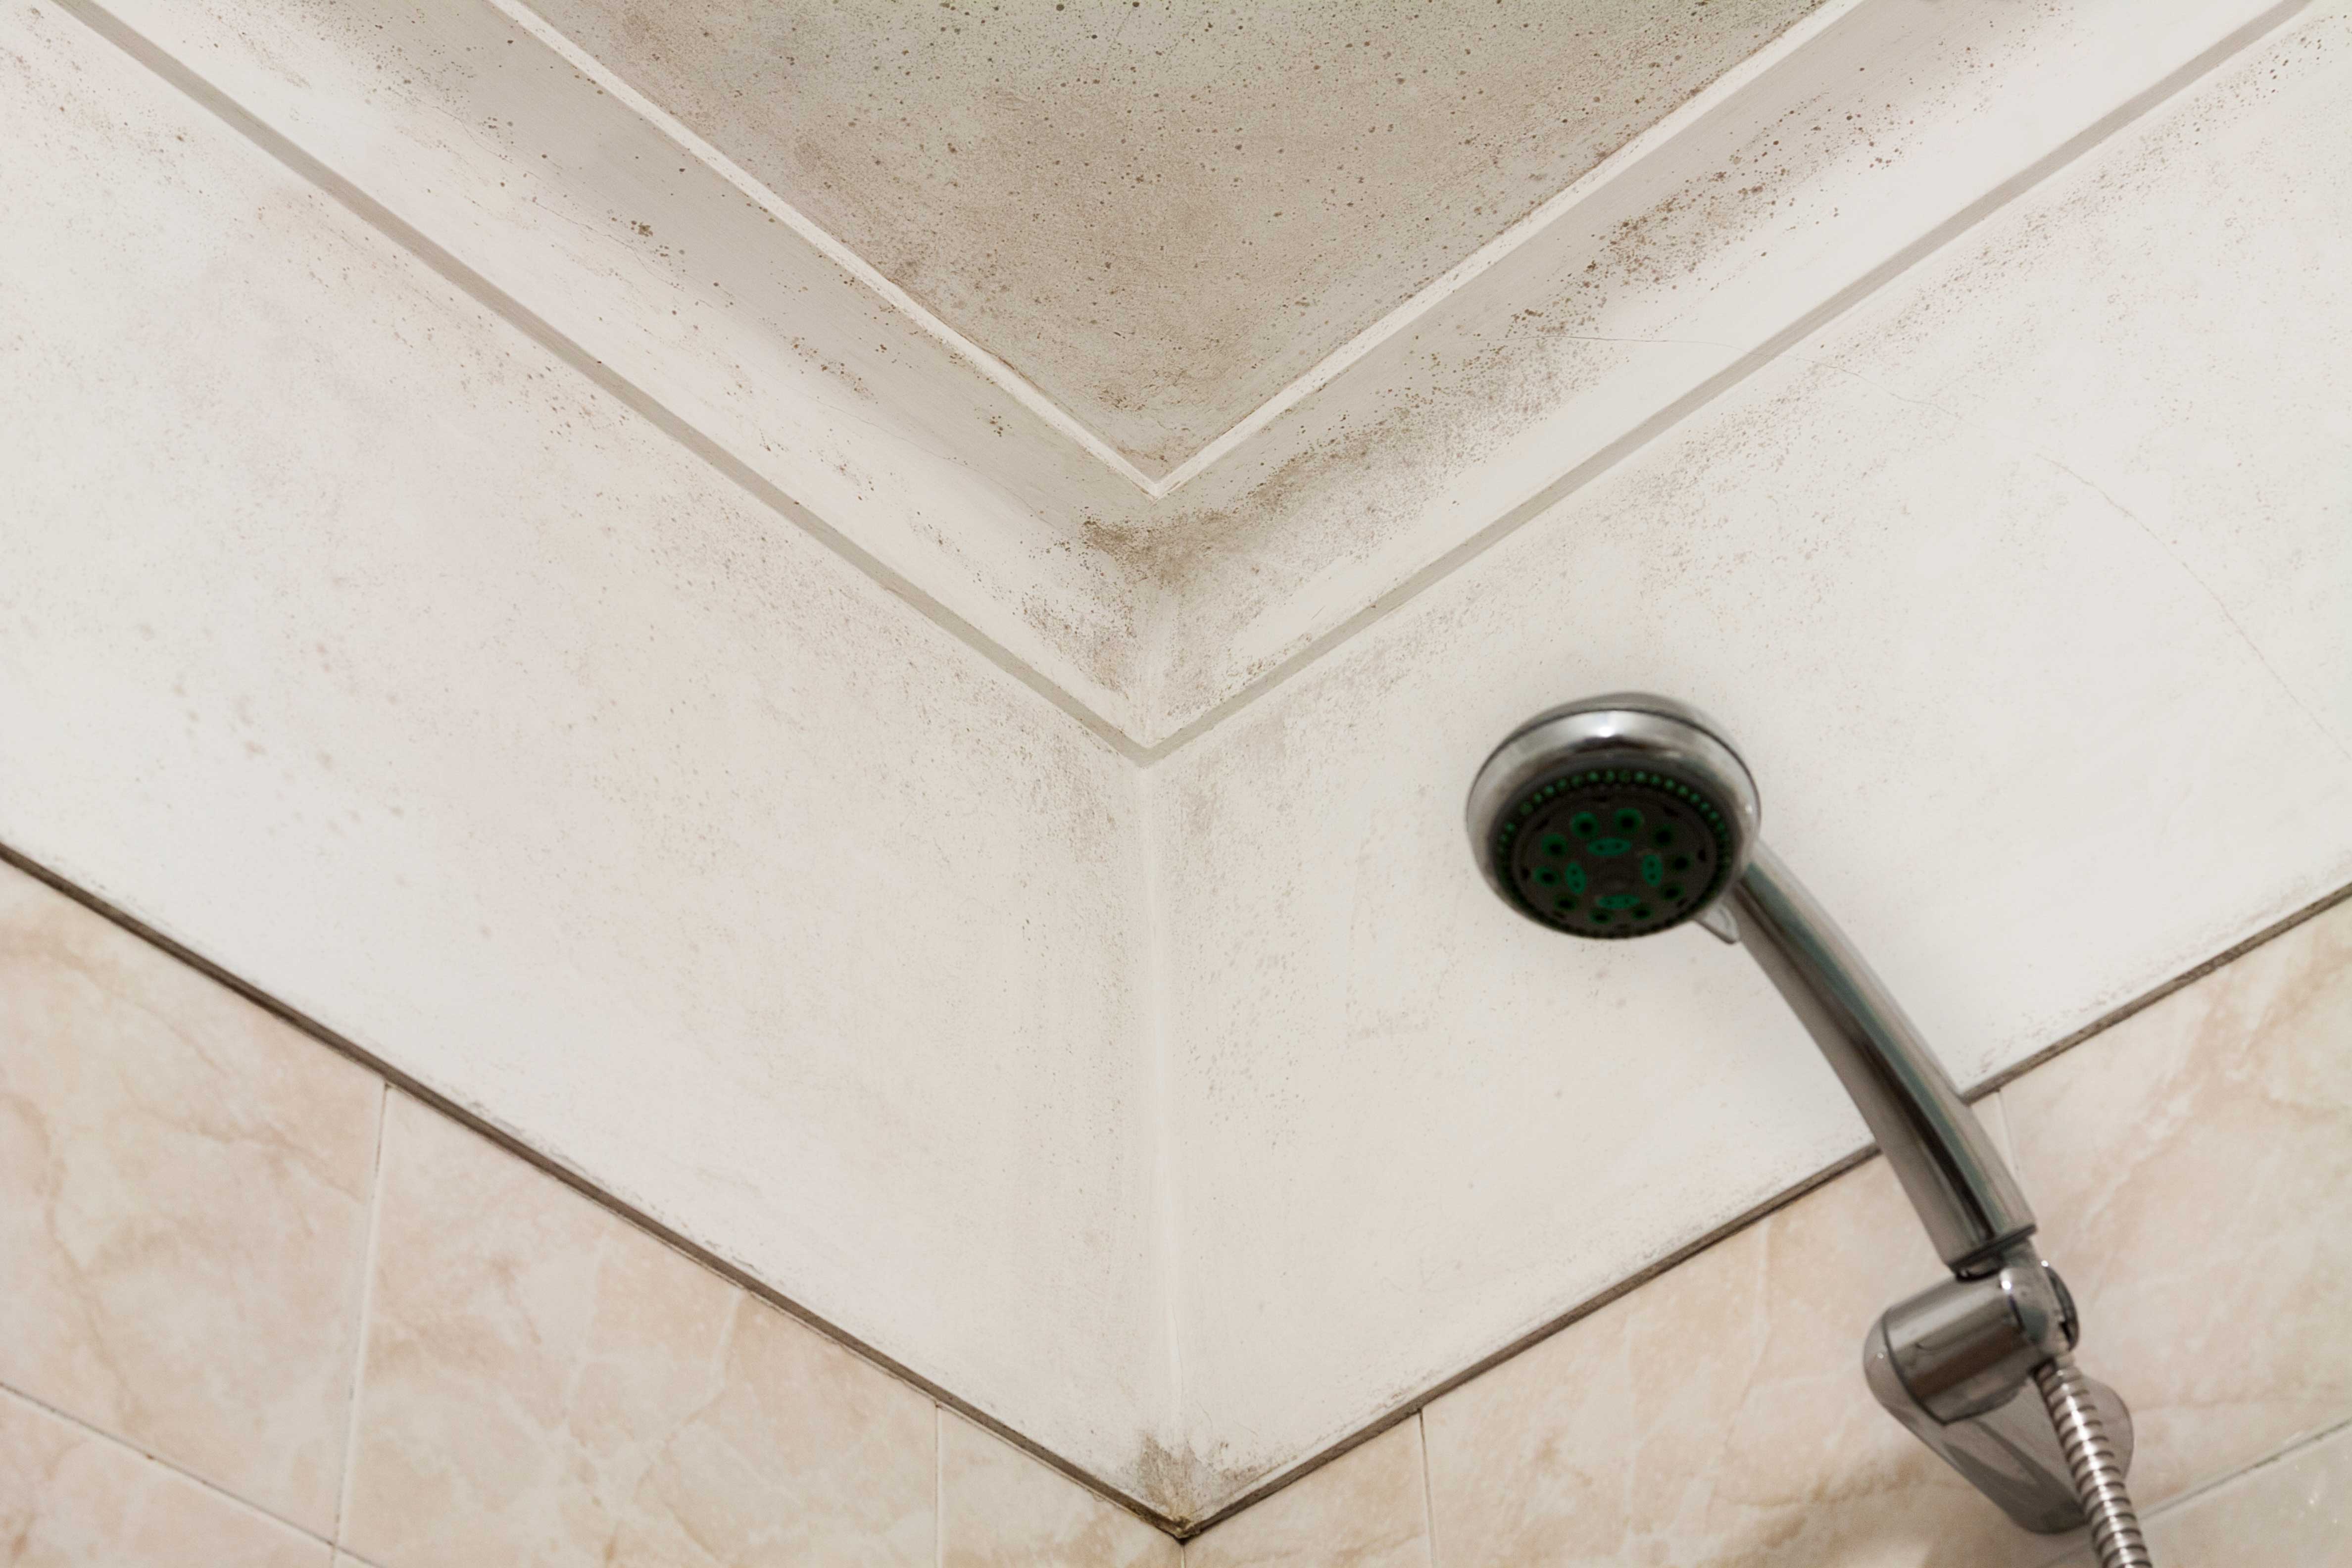 Black Mold on Your Bathroom Ceiling? Read This First